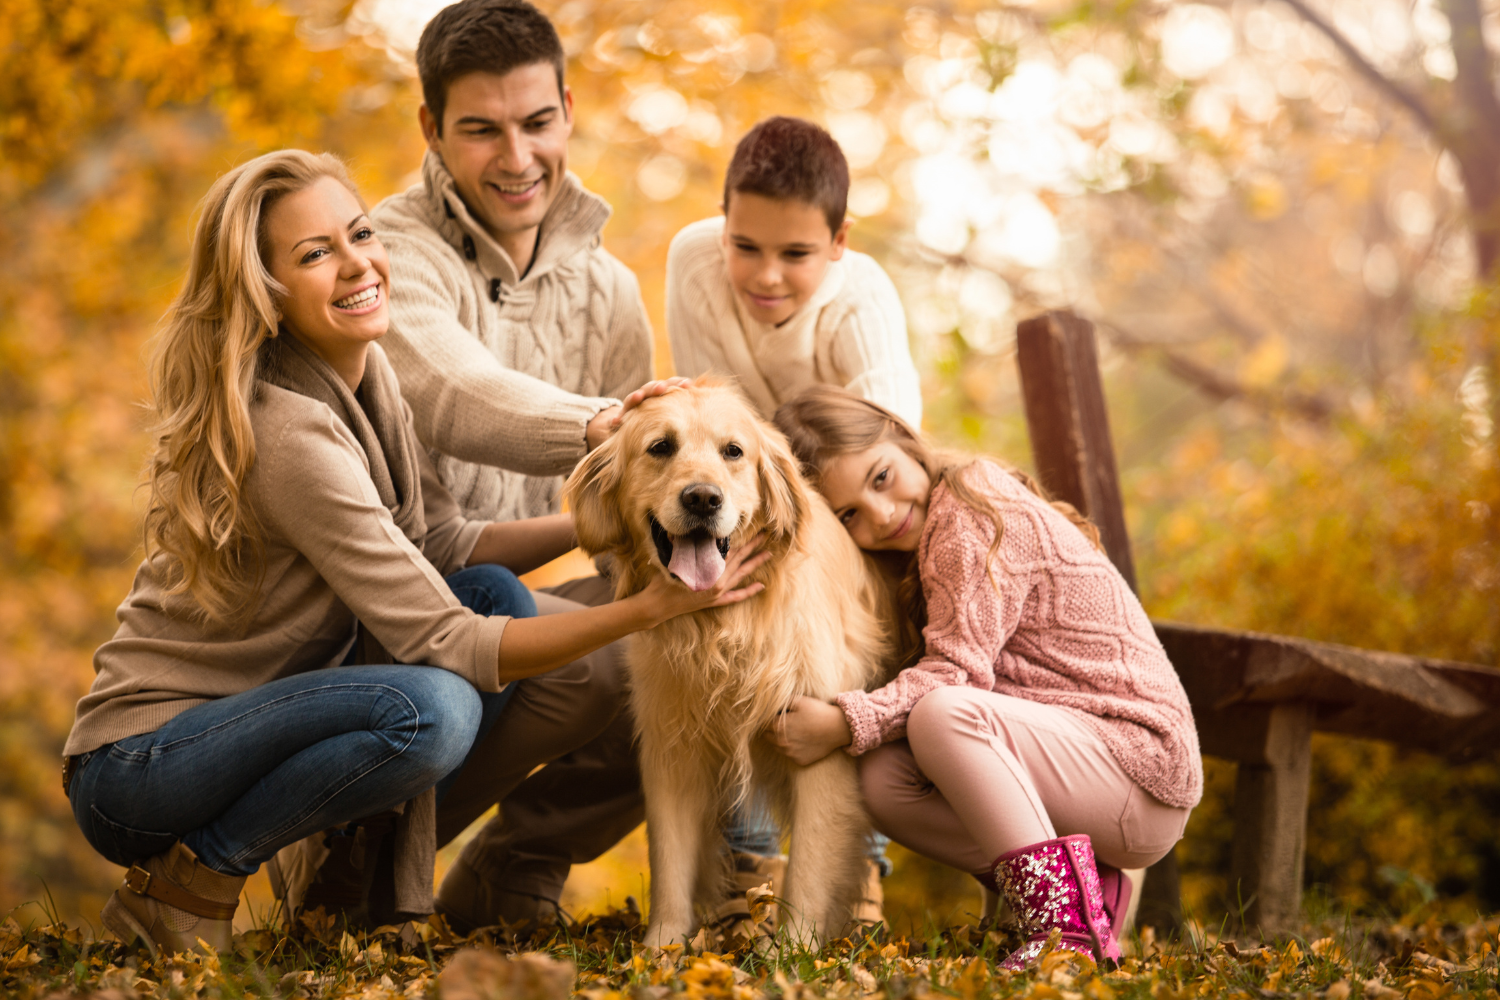 How to Prep For Your Fall Family Photos